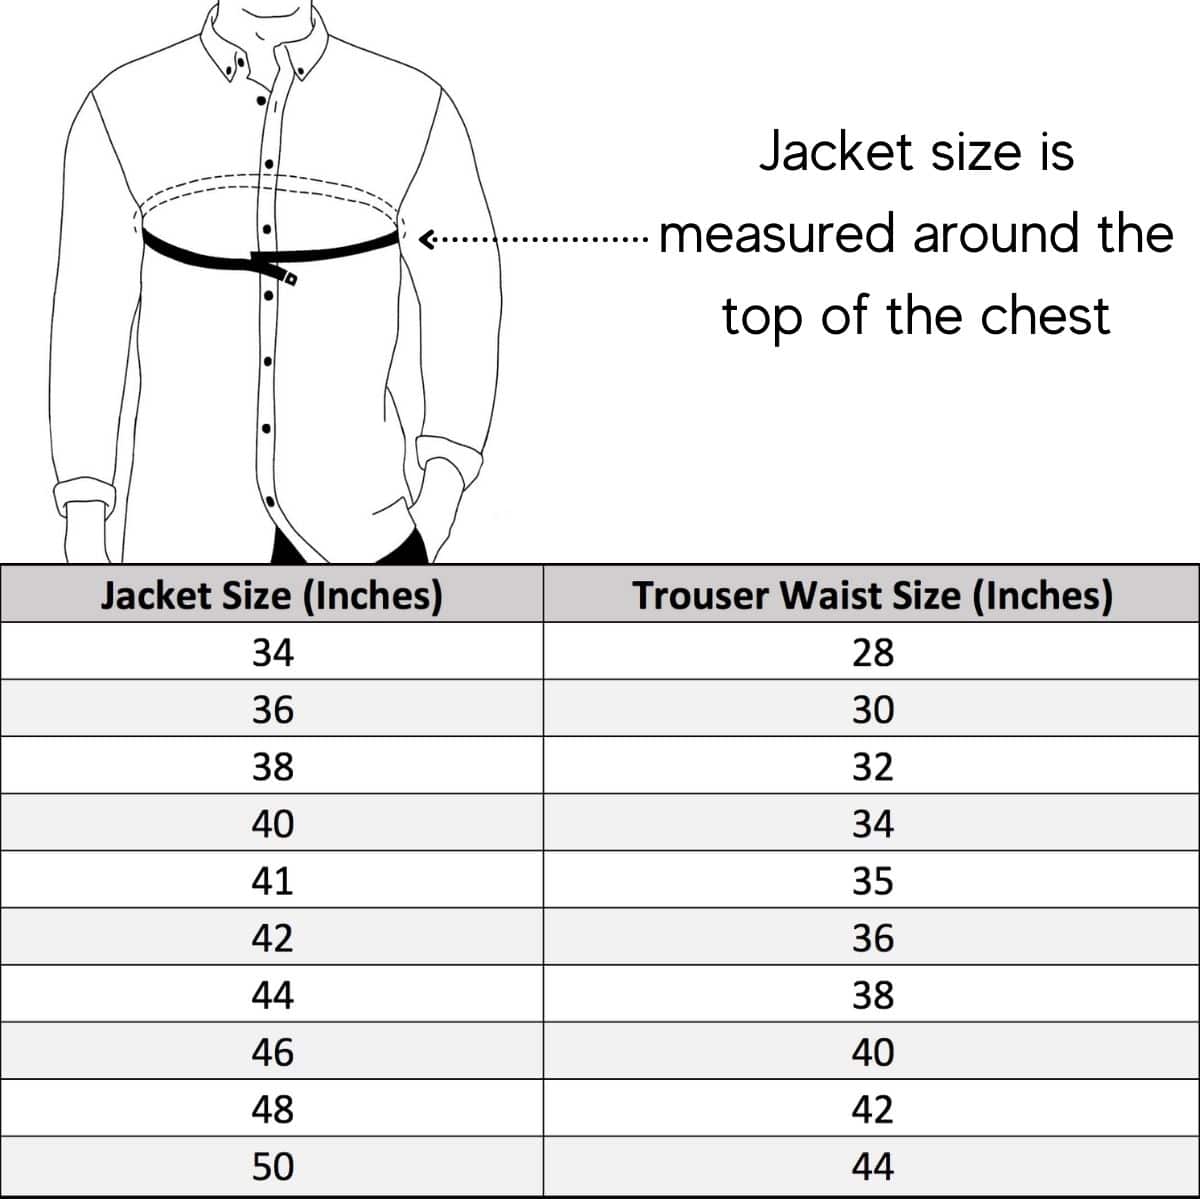 Jacket size is measured around the top of the Chest